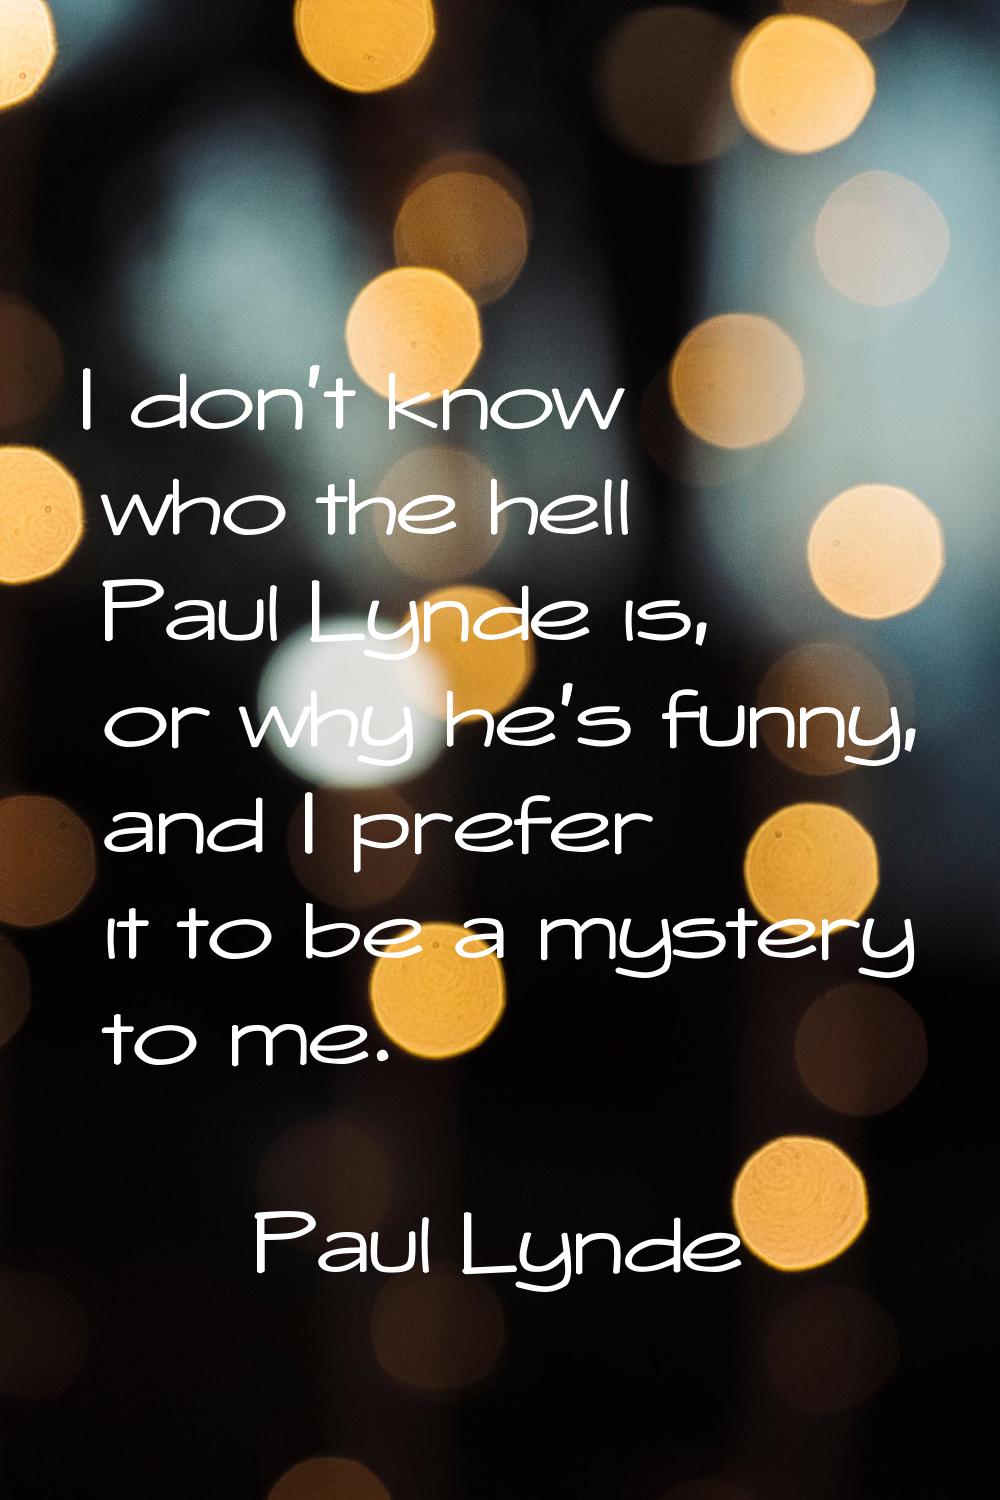 I don't know who the hell Paul Lynde is, or why he's funny, and I prefer it to be a mystery to me.